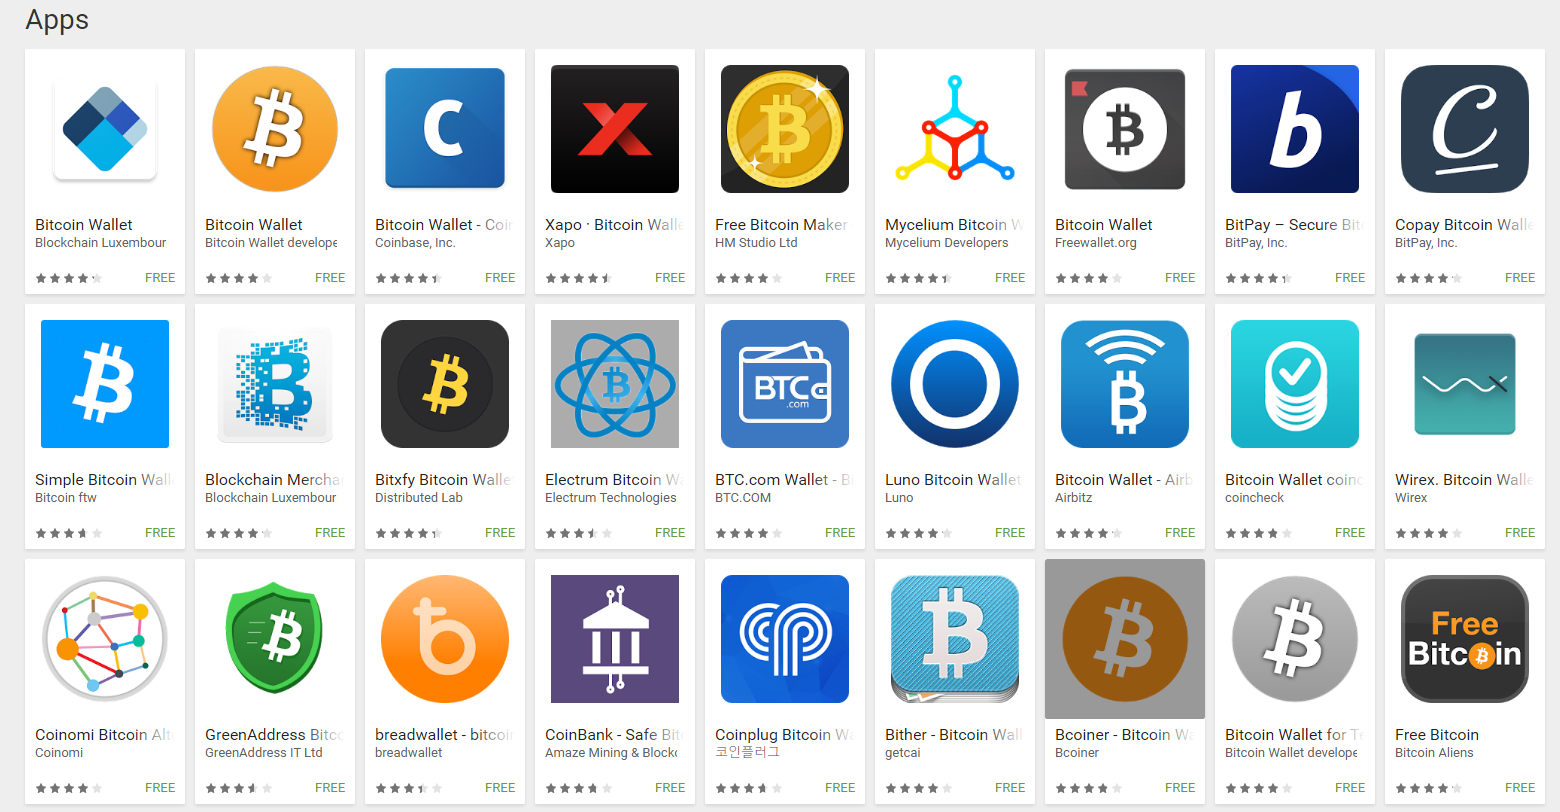 Testing tips: How to test Bitcoin wallet apps? | Ubertesters